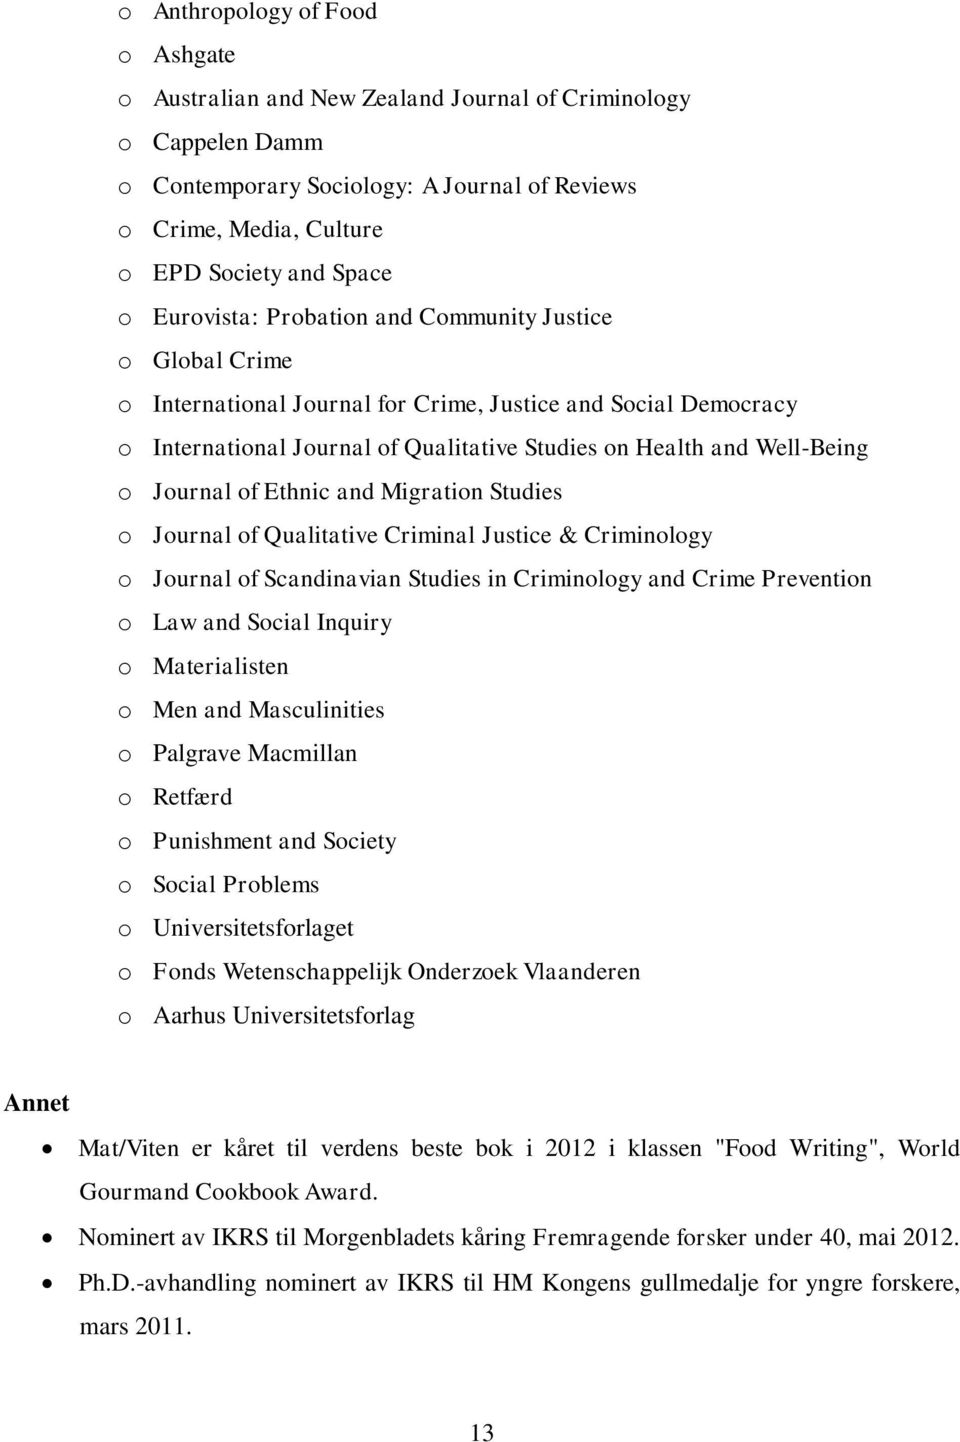 Journal of Ethnic and Migration Studies o Journal of Qualitative Criminal Justice & Criminology o Journal of Scandinavian Studies in Criminology and Crime Prevention o Law and Social Inquiry o